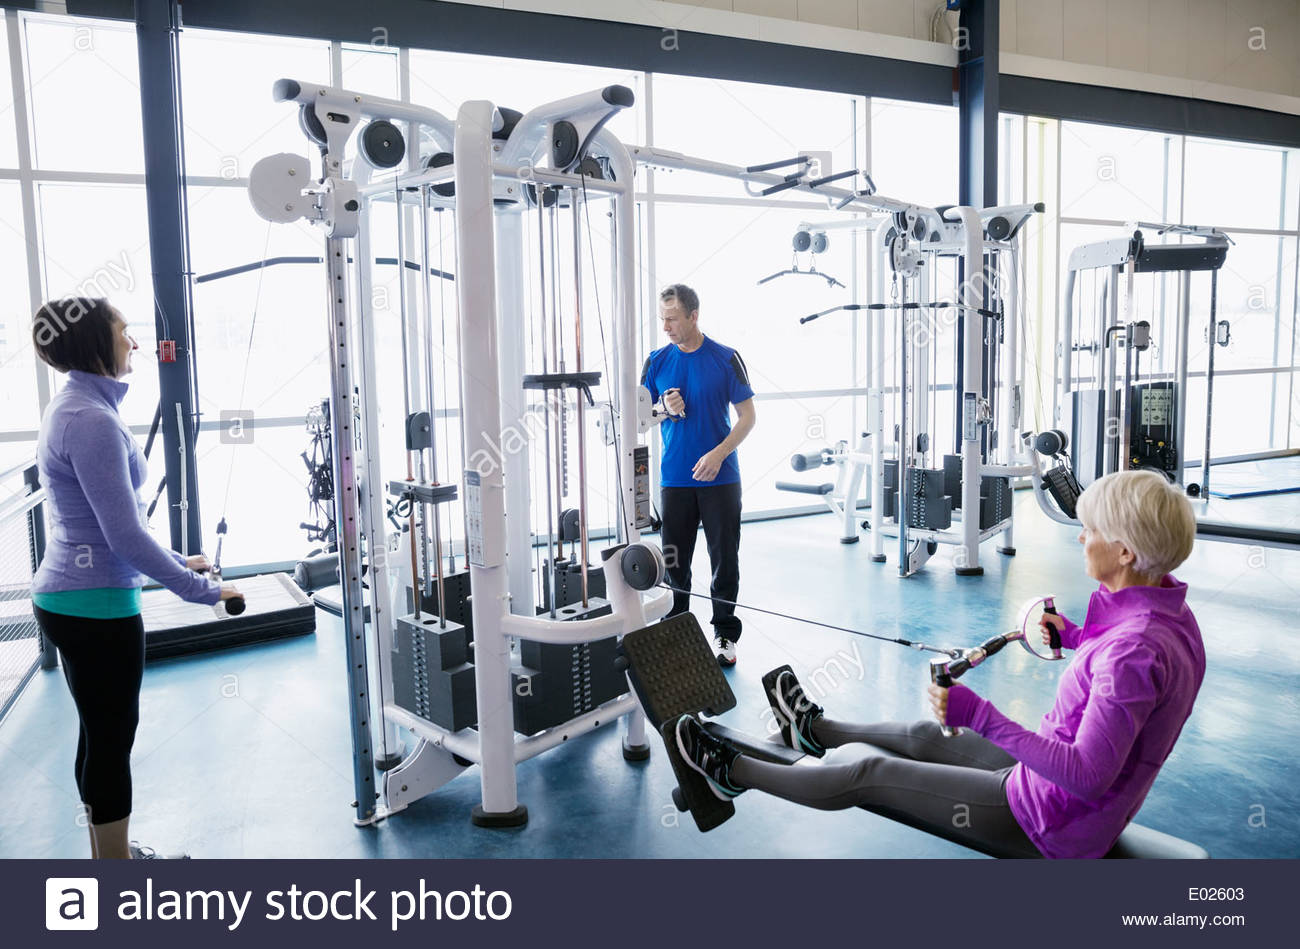 People using weight machines at gym Stock Photo